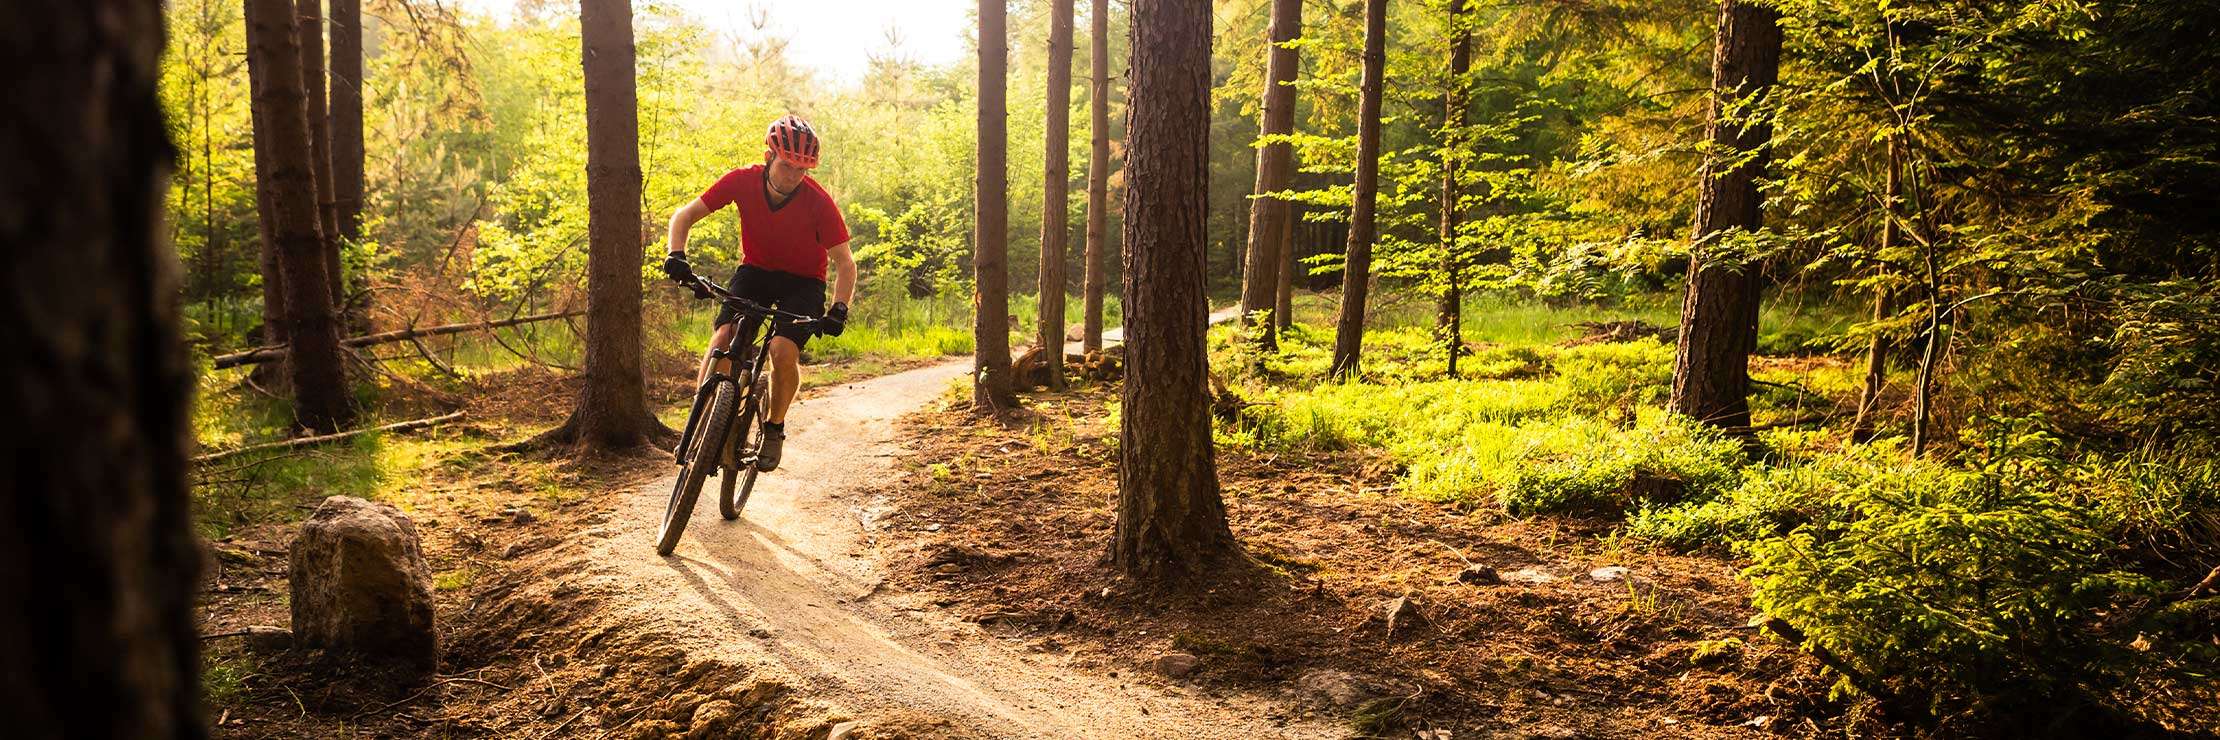 find a new trail at cycle craft